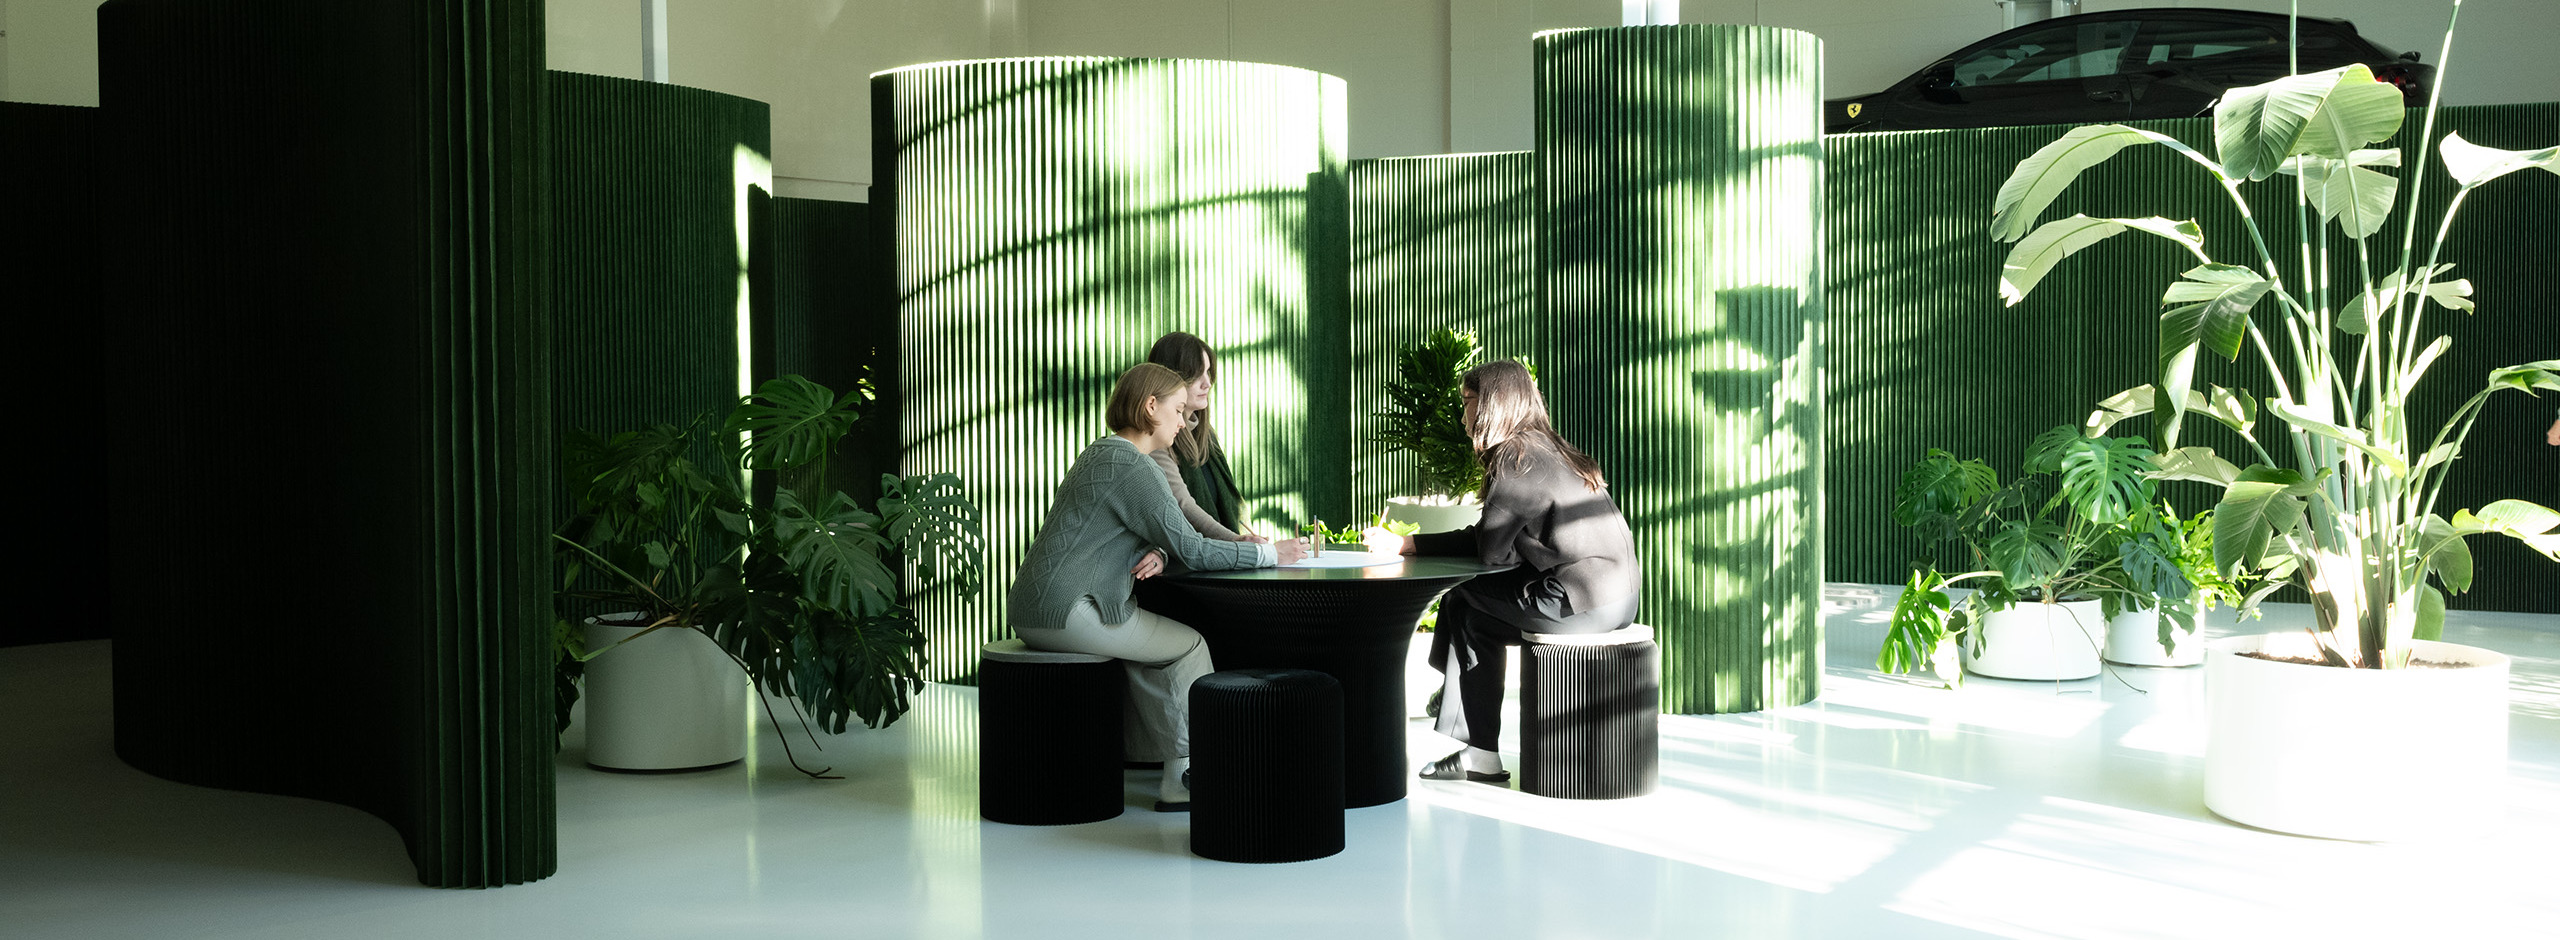 green softwall,acoustic partitions,Pantone 17-0230green in architecture,molo